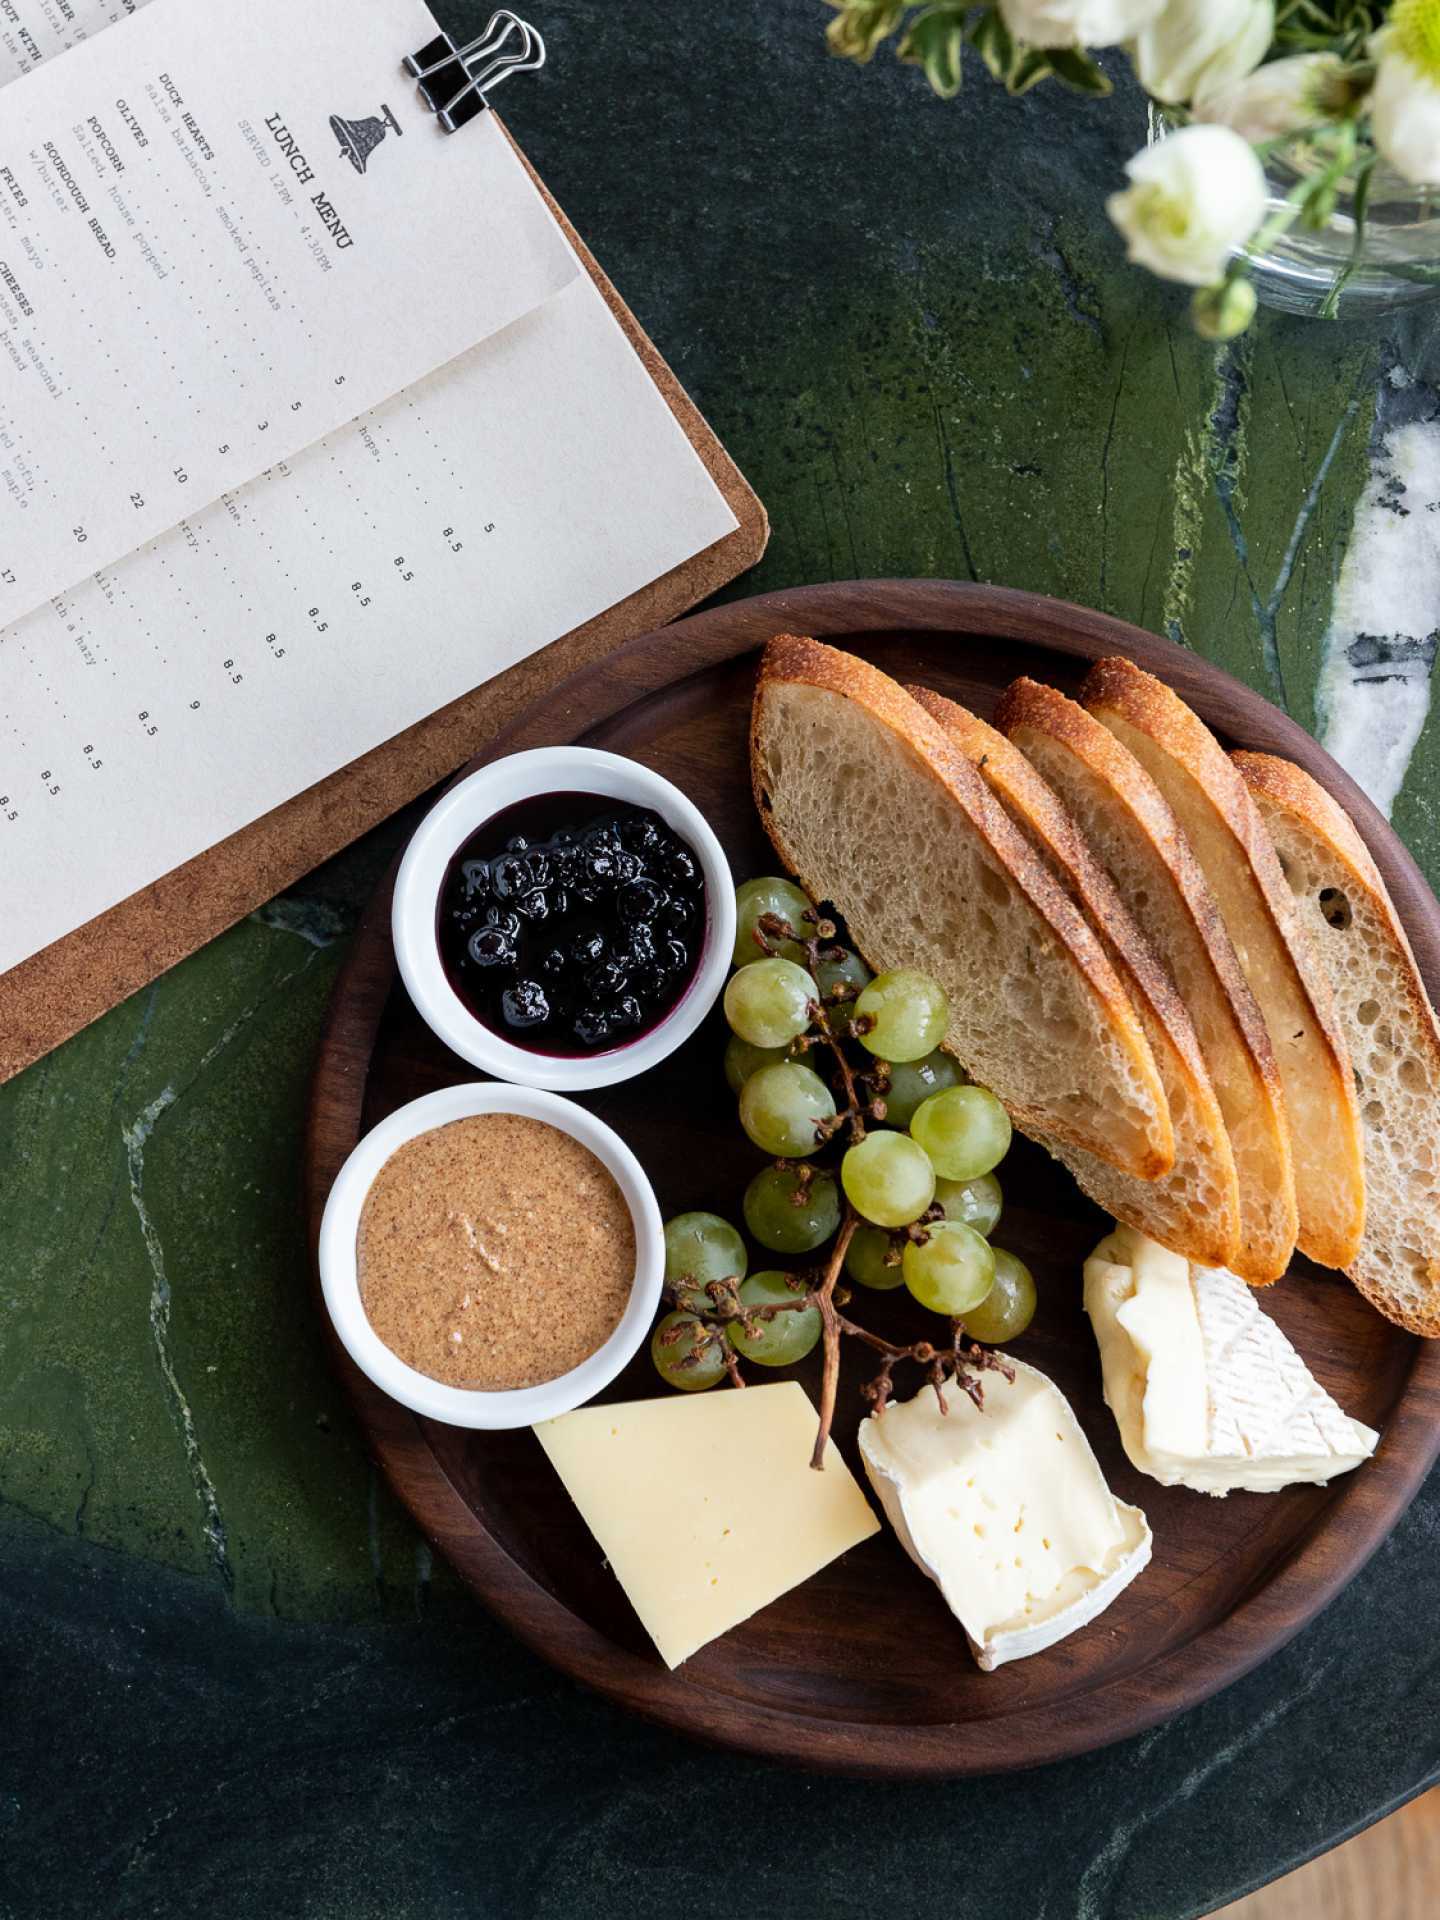 Toronto breweries and alcohol stores | Chicken liver mousse at Bellwoods Brewery